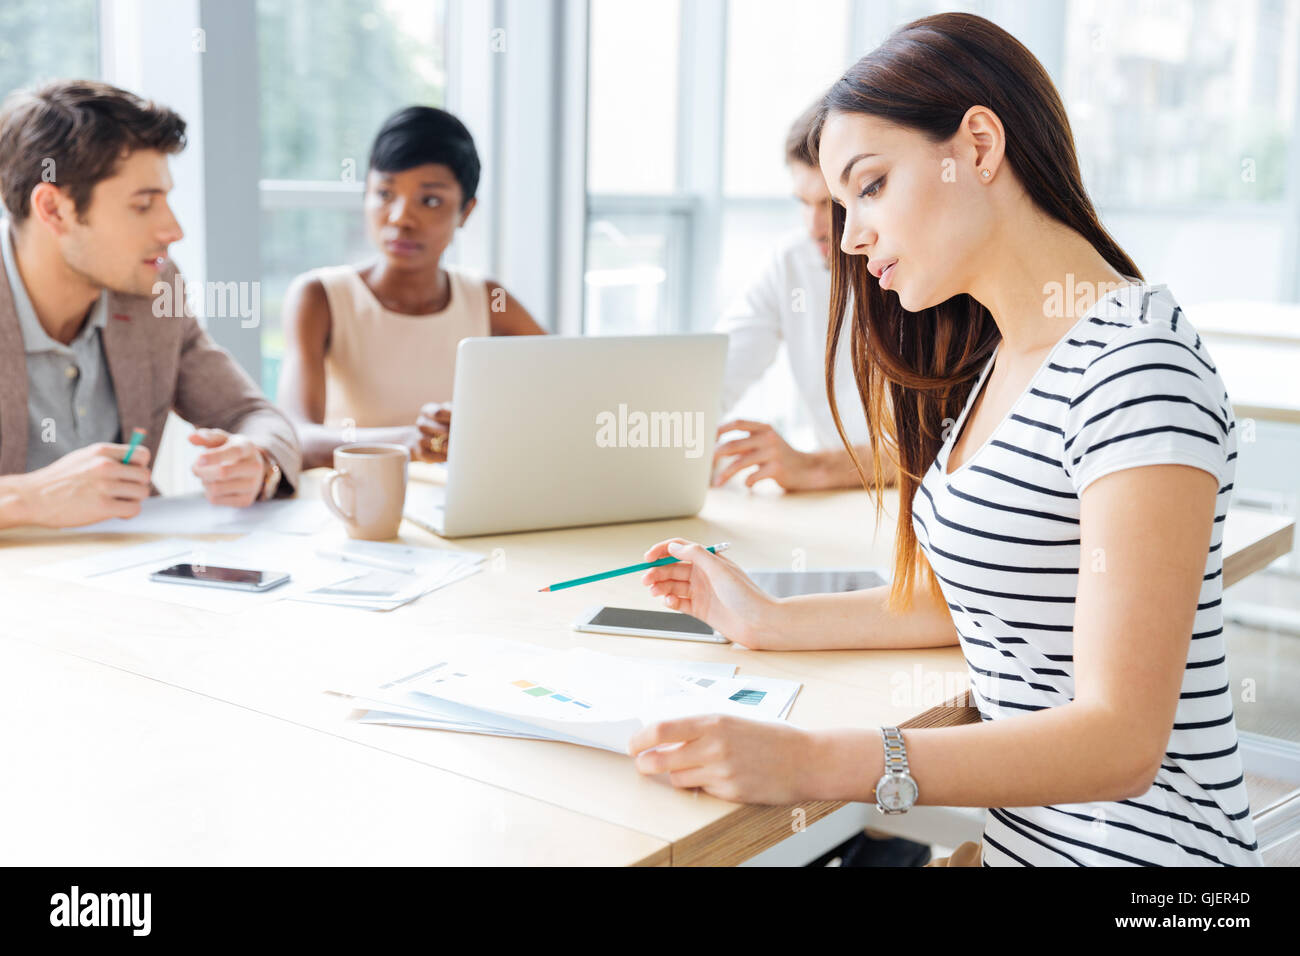 Concentrated young woman sitting and working with her business team in office Stock Photo